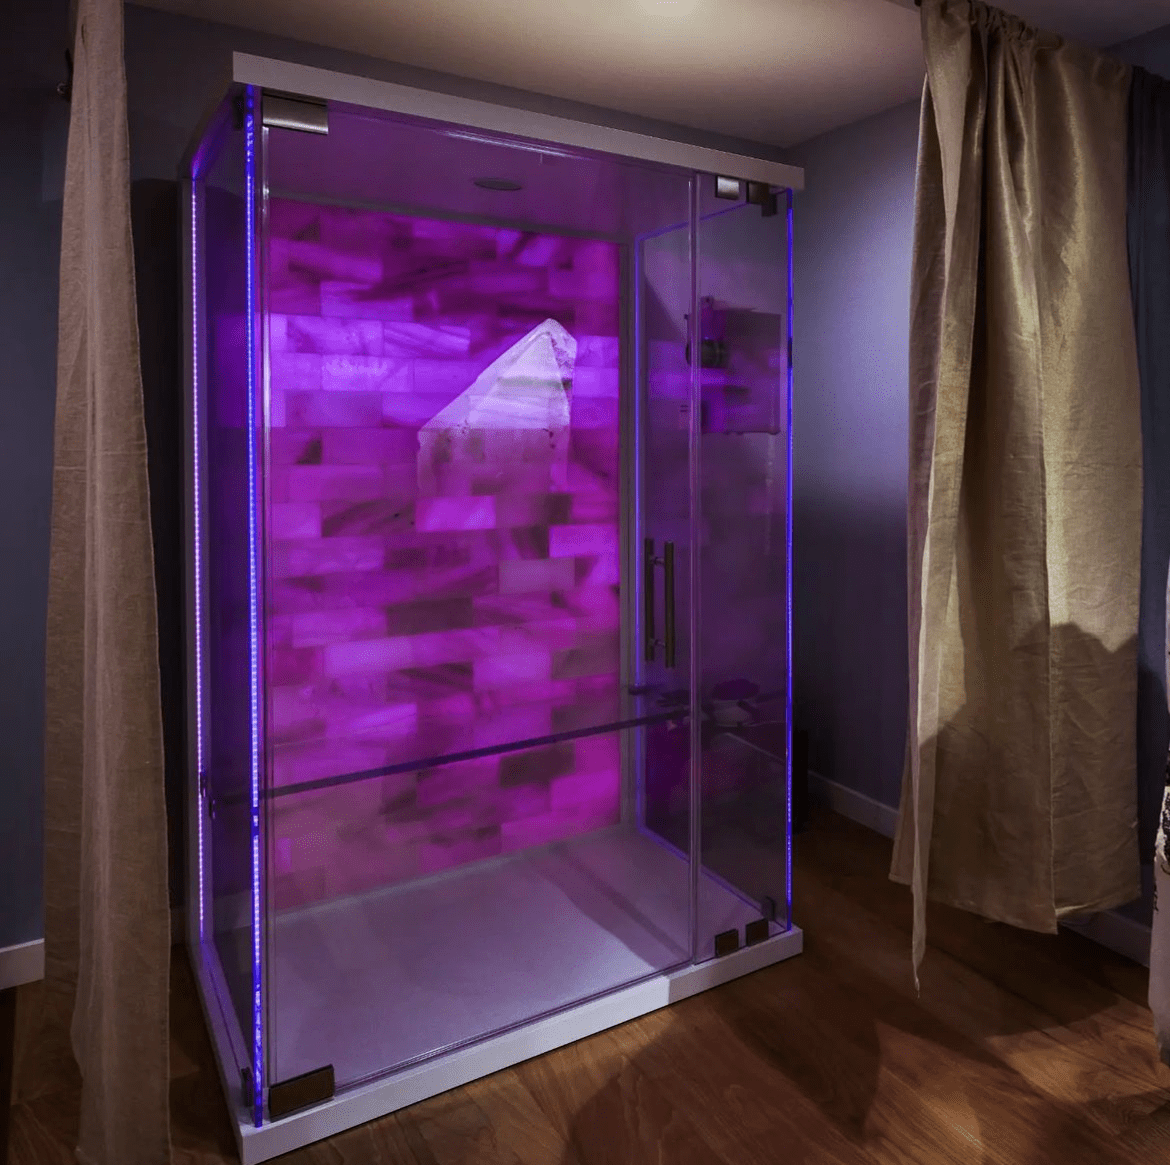 A SALT Booth for salt therapy at IntoMeSea in Santa Monica, California.